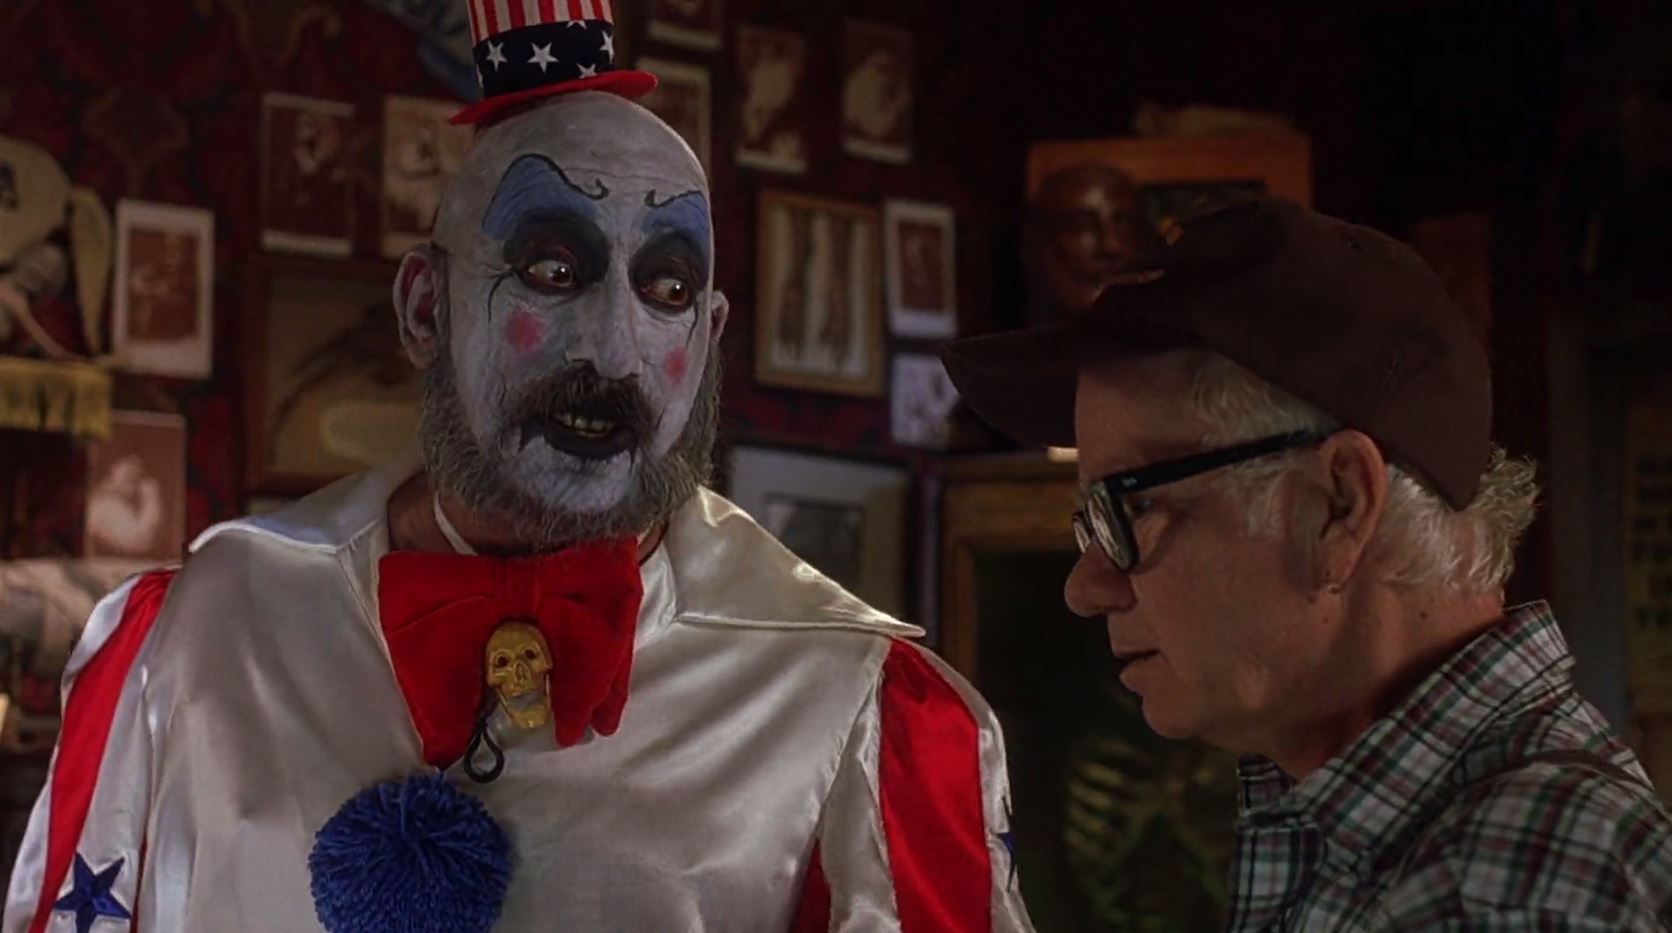 Captain Spaulding from House of 1000 Corpses and Devils Rejects! 